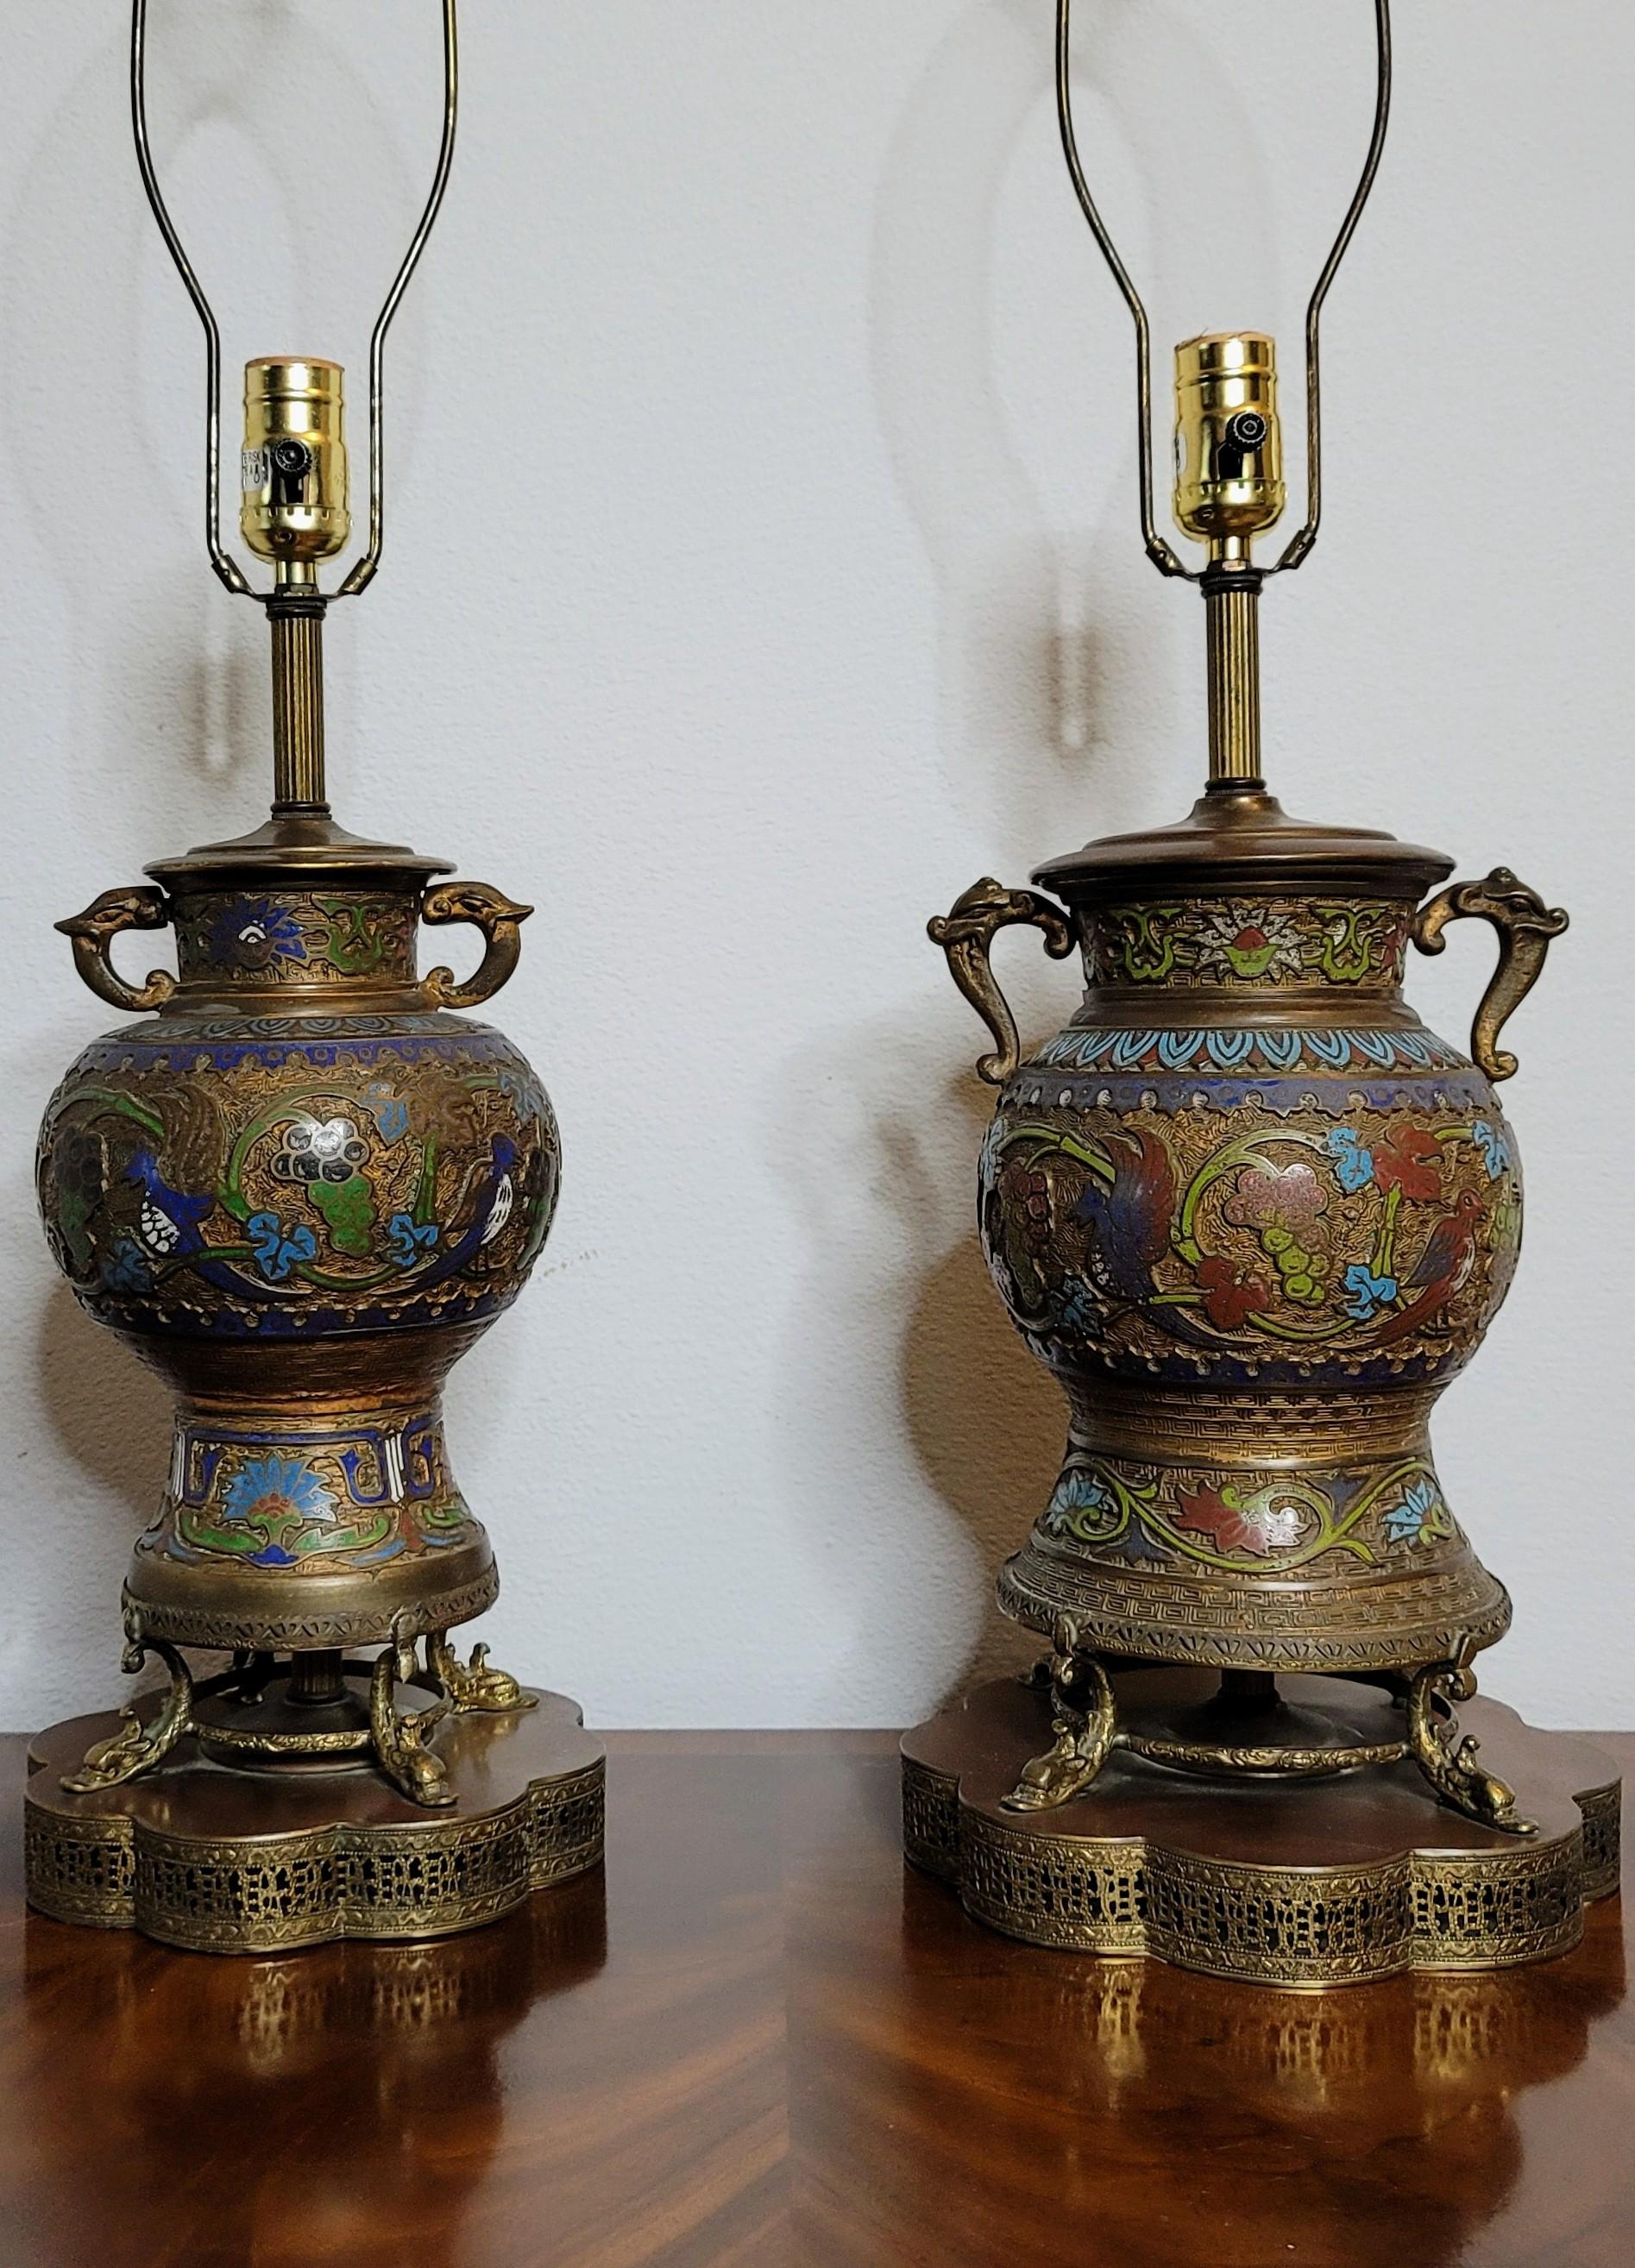 Pair of Antique Asian Champleve’ Enameled Bronze Urns Fashioned As Table Lamps For Sale 3